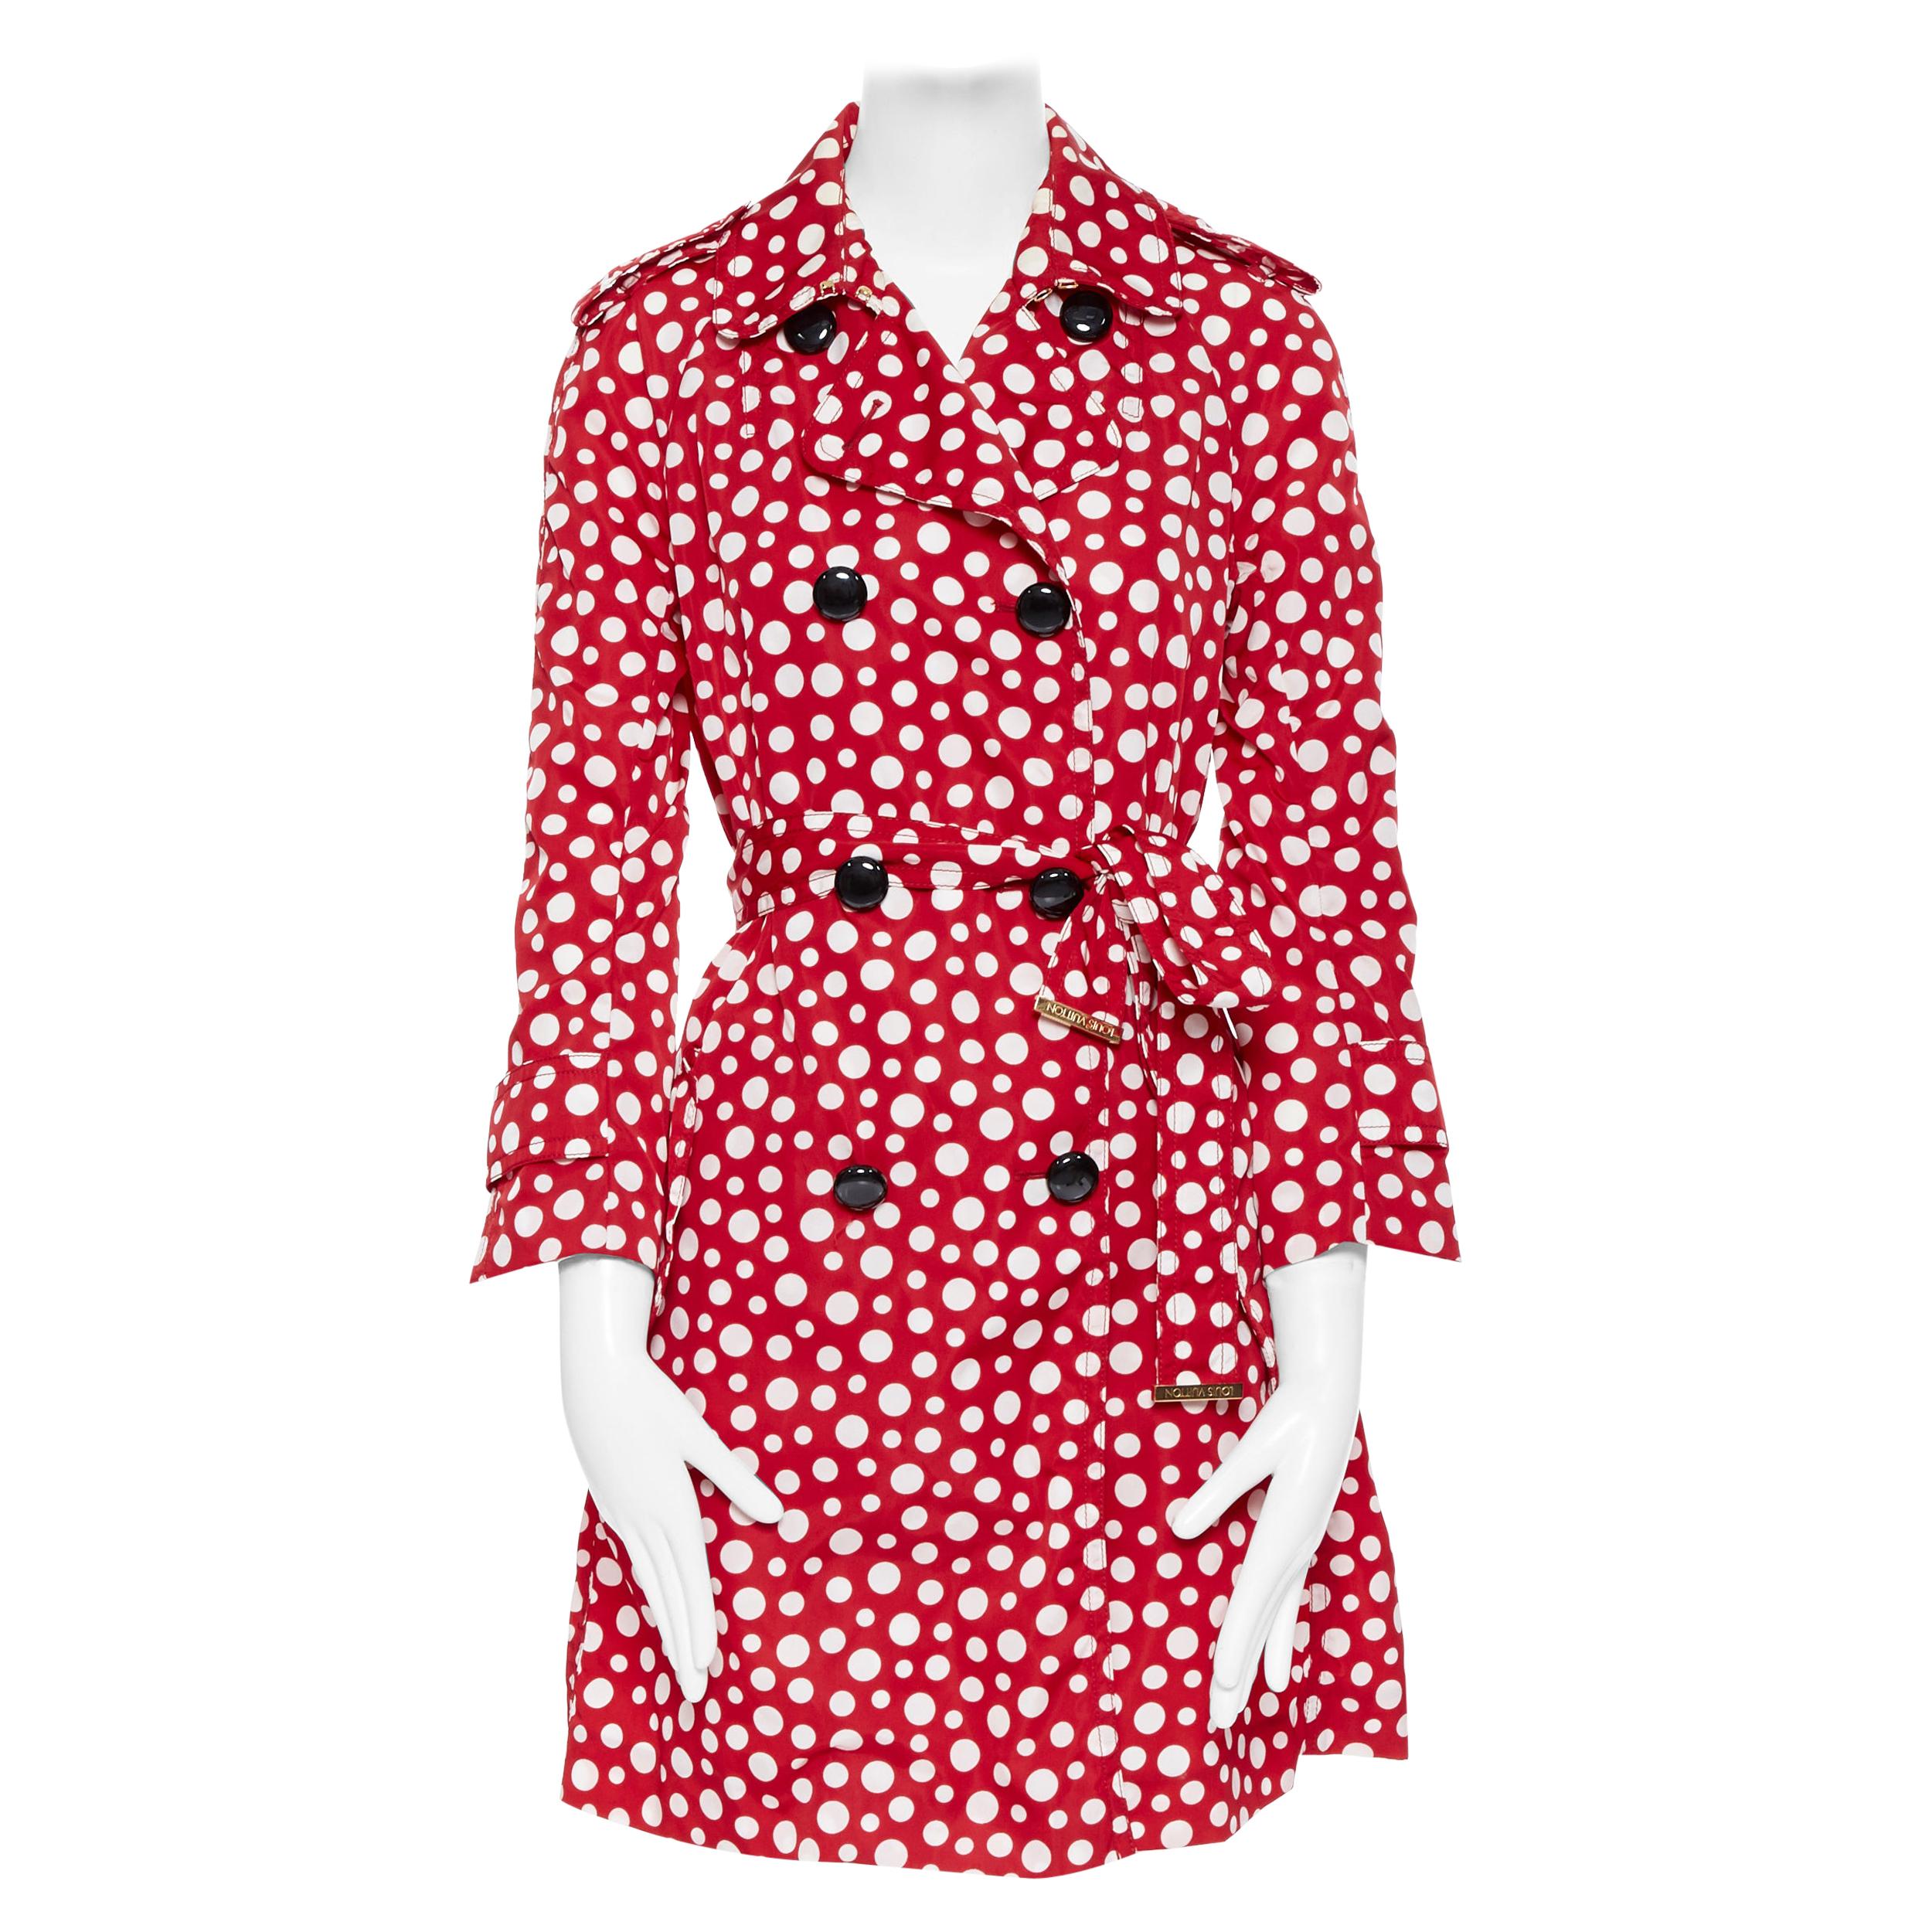 runway LOUIS VUITTON YAYOI KUSAMA red white spot print belted trench coat FR36 S